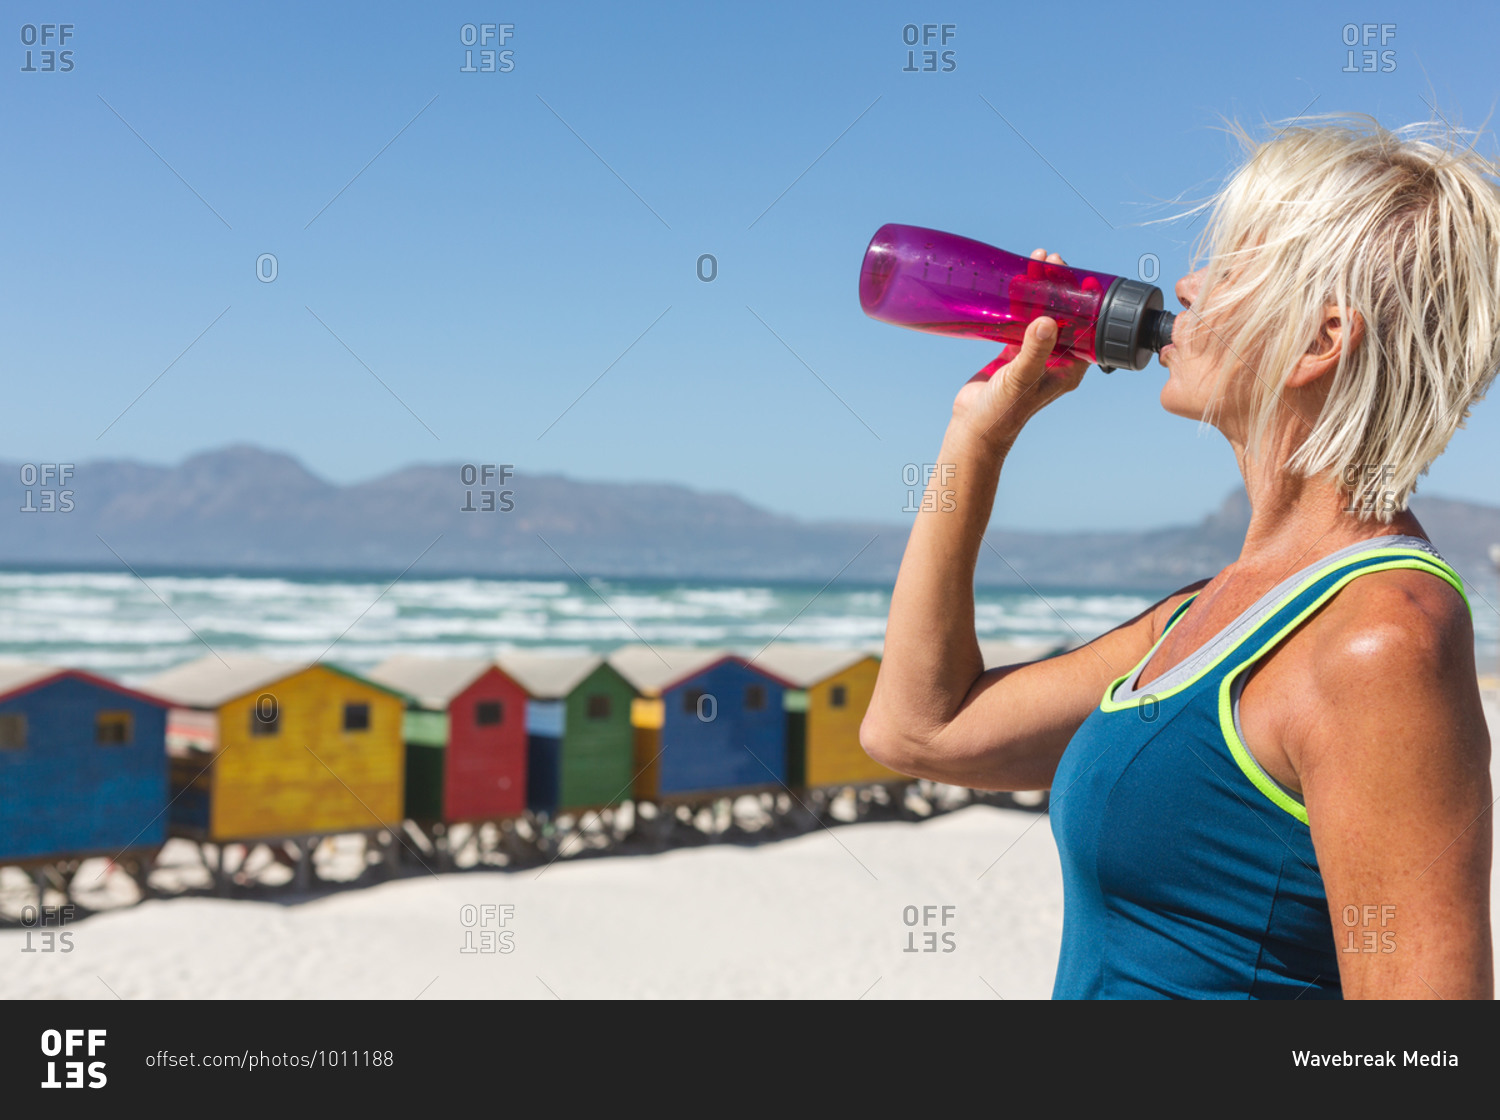 Senior Caucasian woman enjoying exercising on a beach on a sunny day, resting after running on the seashore and drinking water from a bottle with little colorful houses in the background.